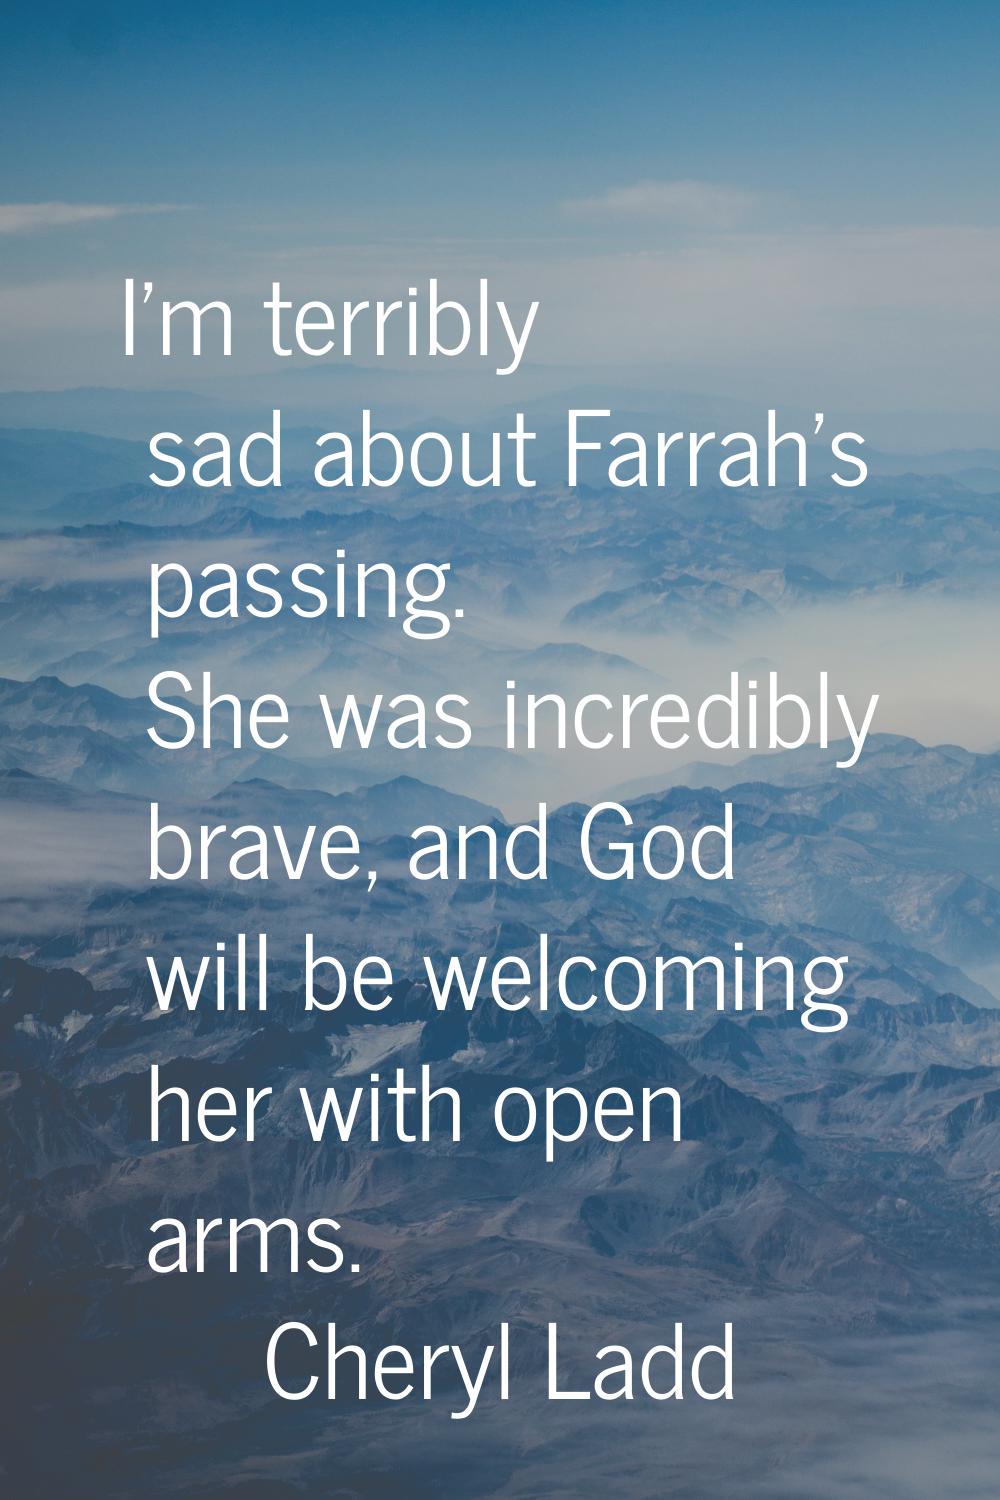 I'm terribly sad about Farrah's passing. She was incredibly brave, and God will be welcoming her wi